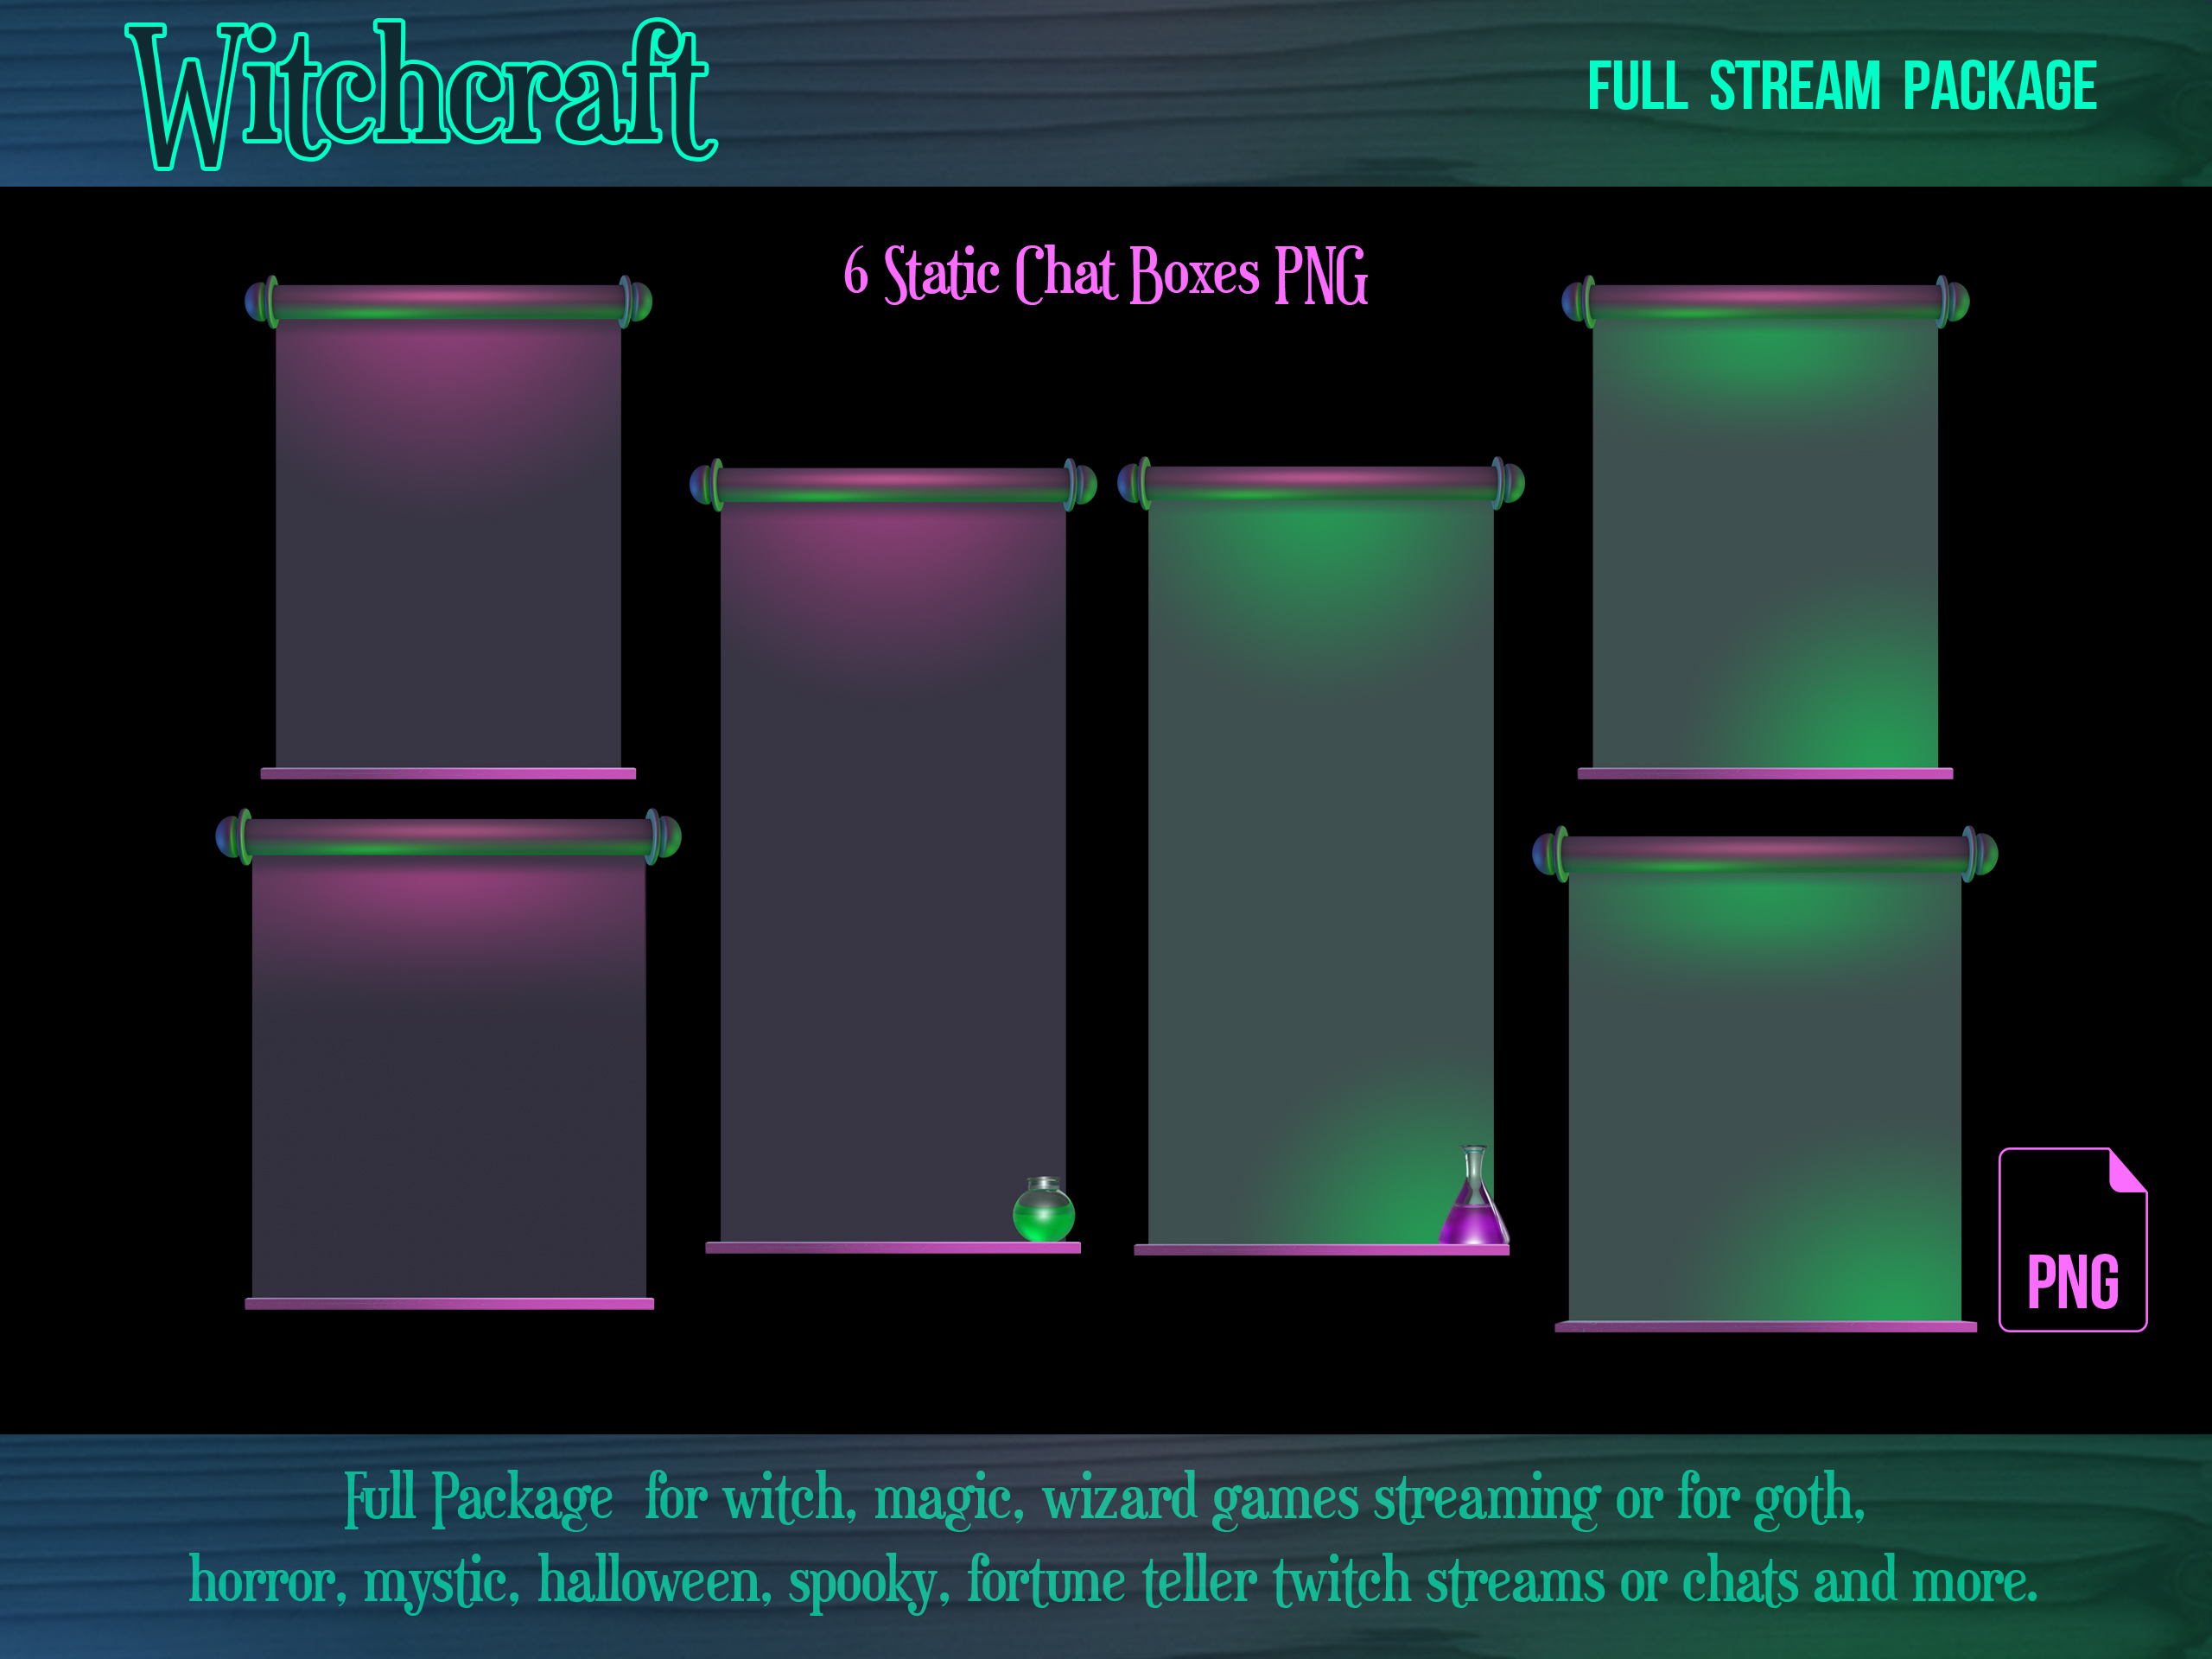 feedback on my just chatting overlay? :) : r/twitchstreams